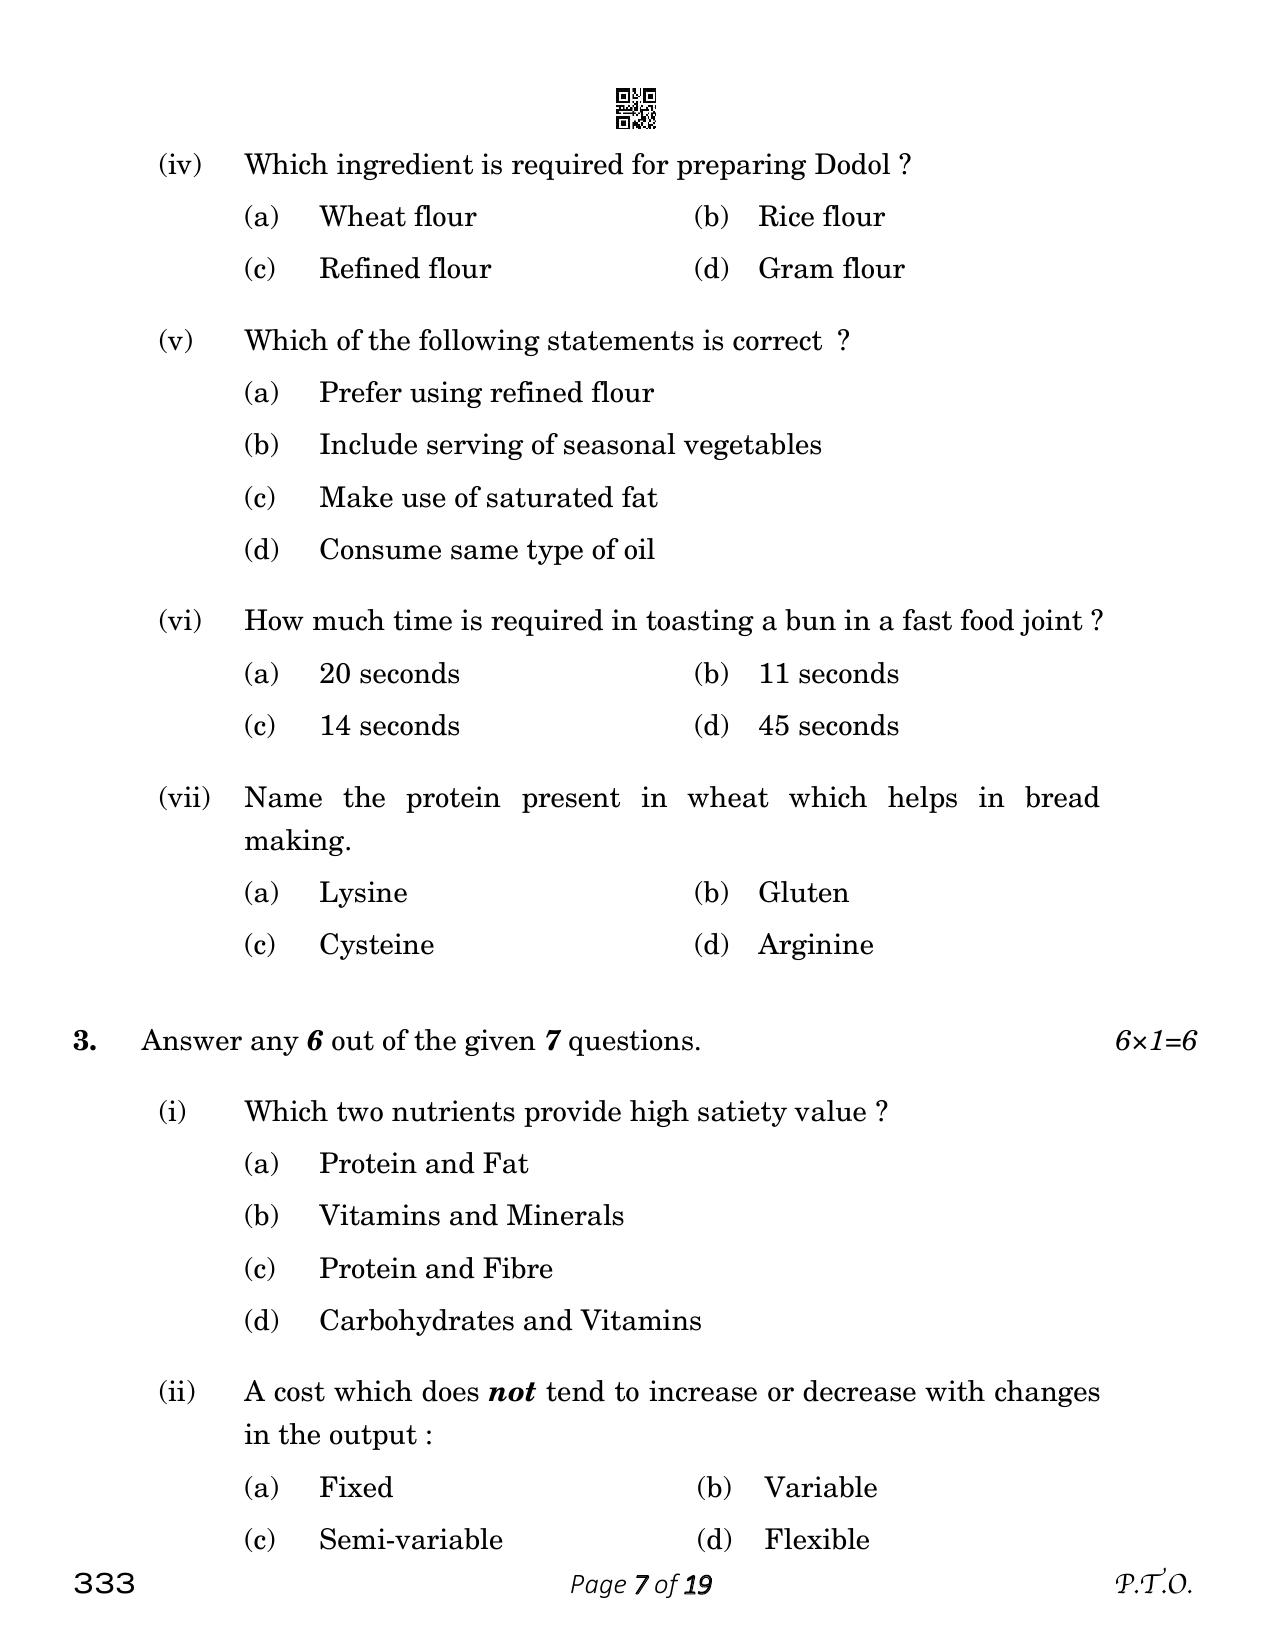 CBSE Class 12 food Production (Compartment) 2023 Question Paper - Page 7